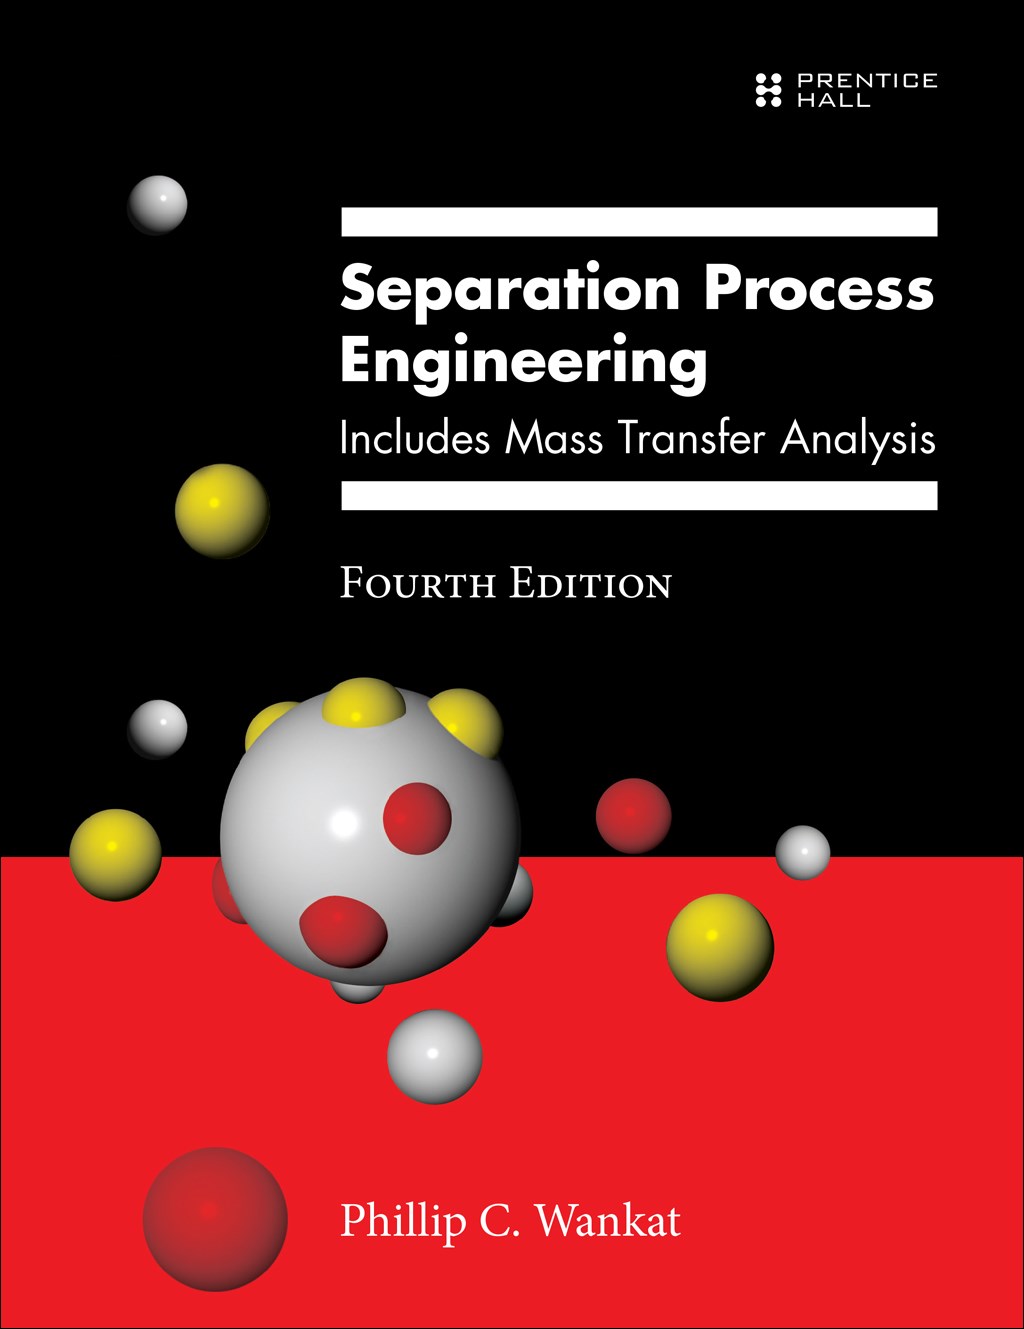 Separation Process Engineering: Includes Mass Transfer Analysis, 4th Edition